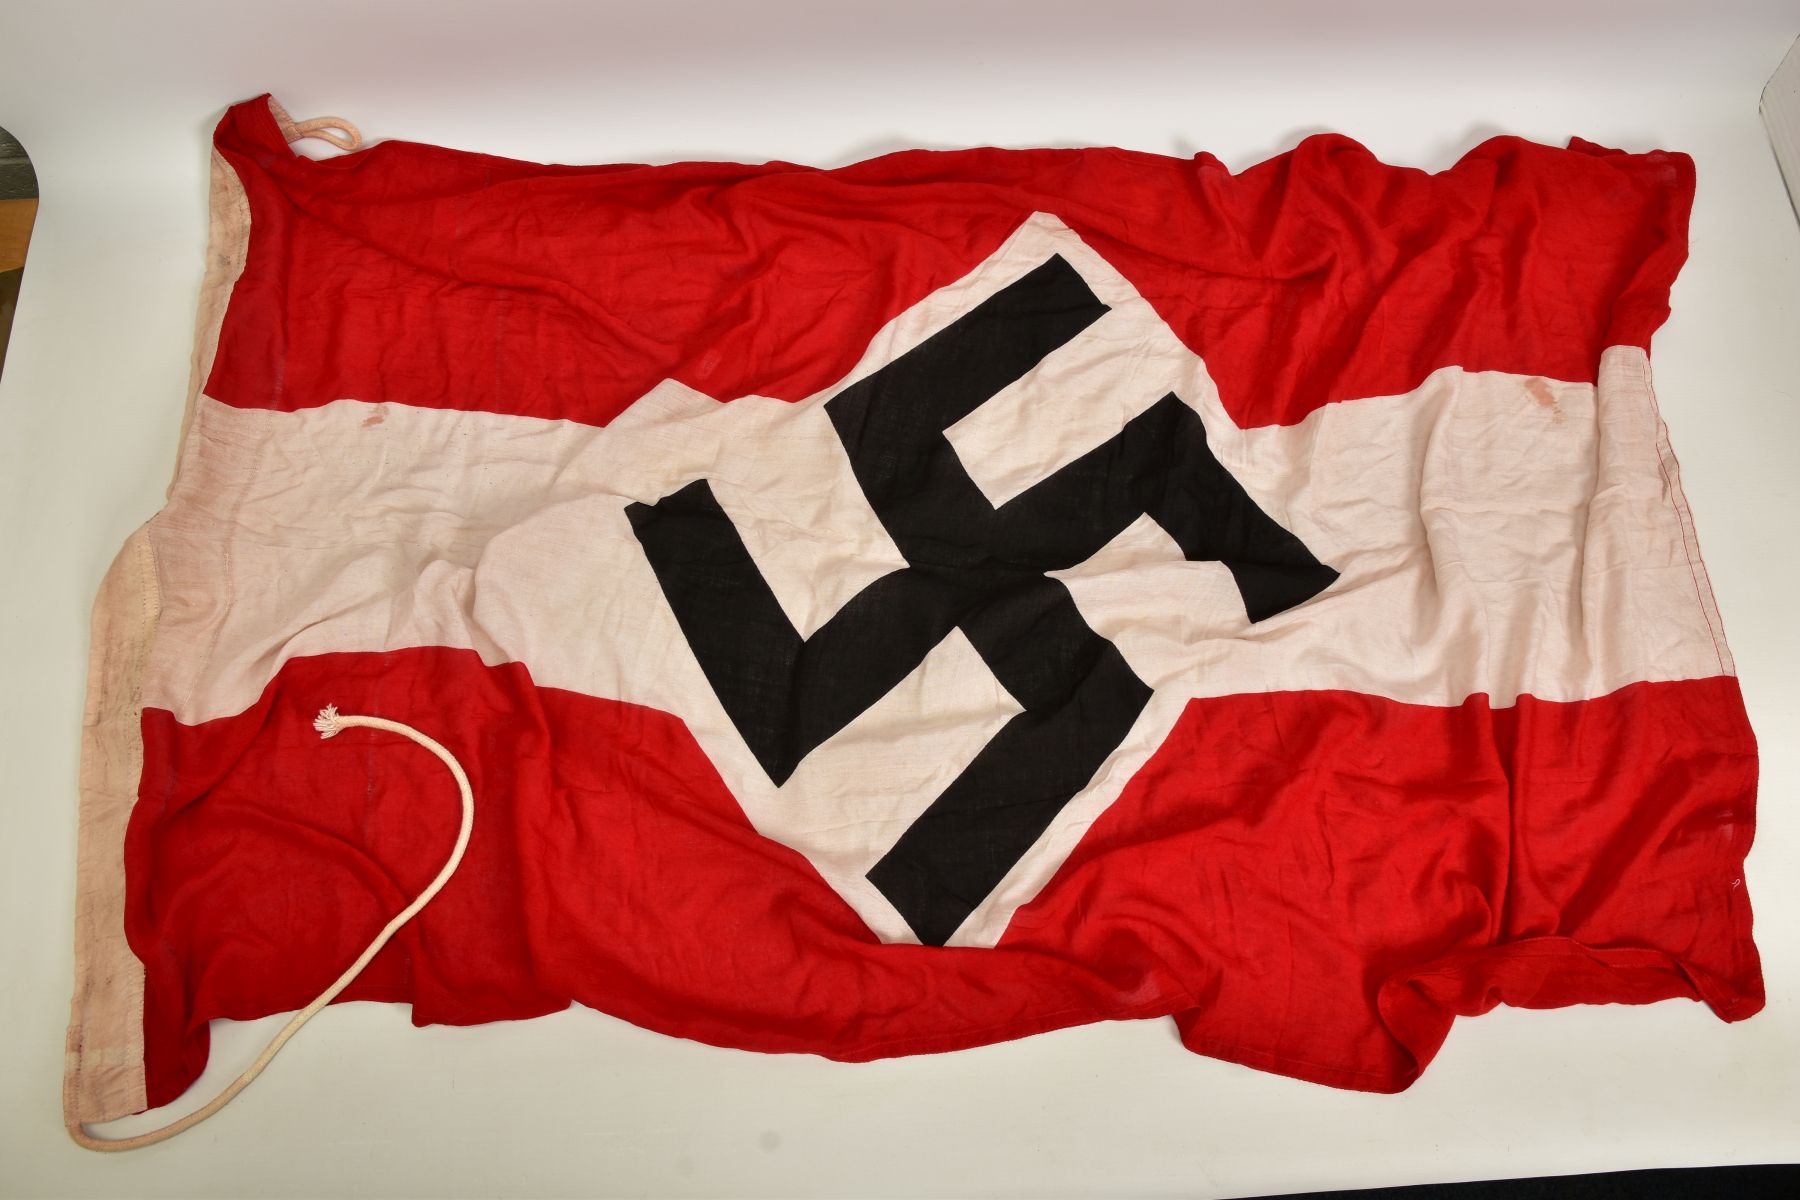 A 1943 DATED GERMAN 3RD REICH HITLER JUGEND (Hitler Youth) FLAG, size is approximately 180cm x